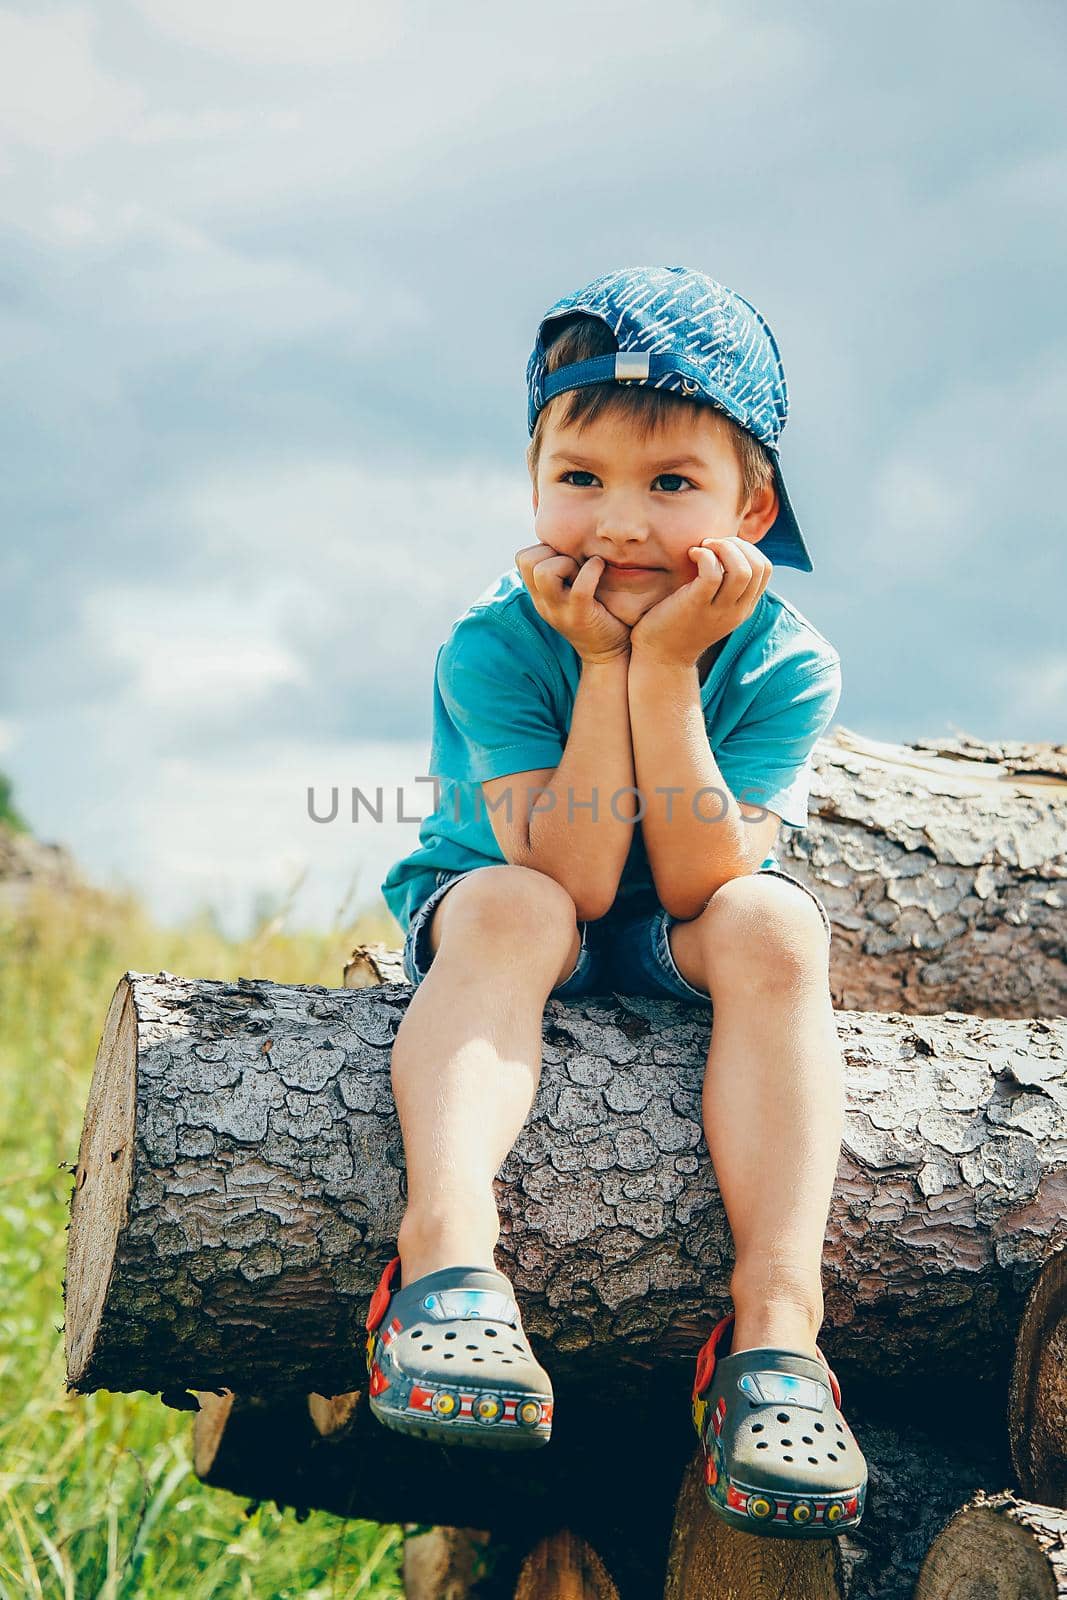 A boy in a blue baseball cap and denim shorts sits on a log and looks thoughtfully by Mastak80